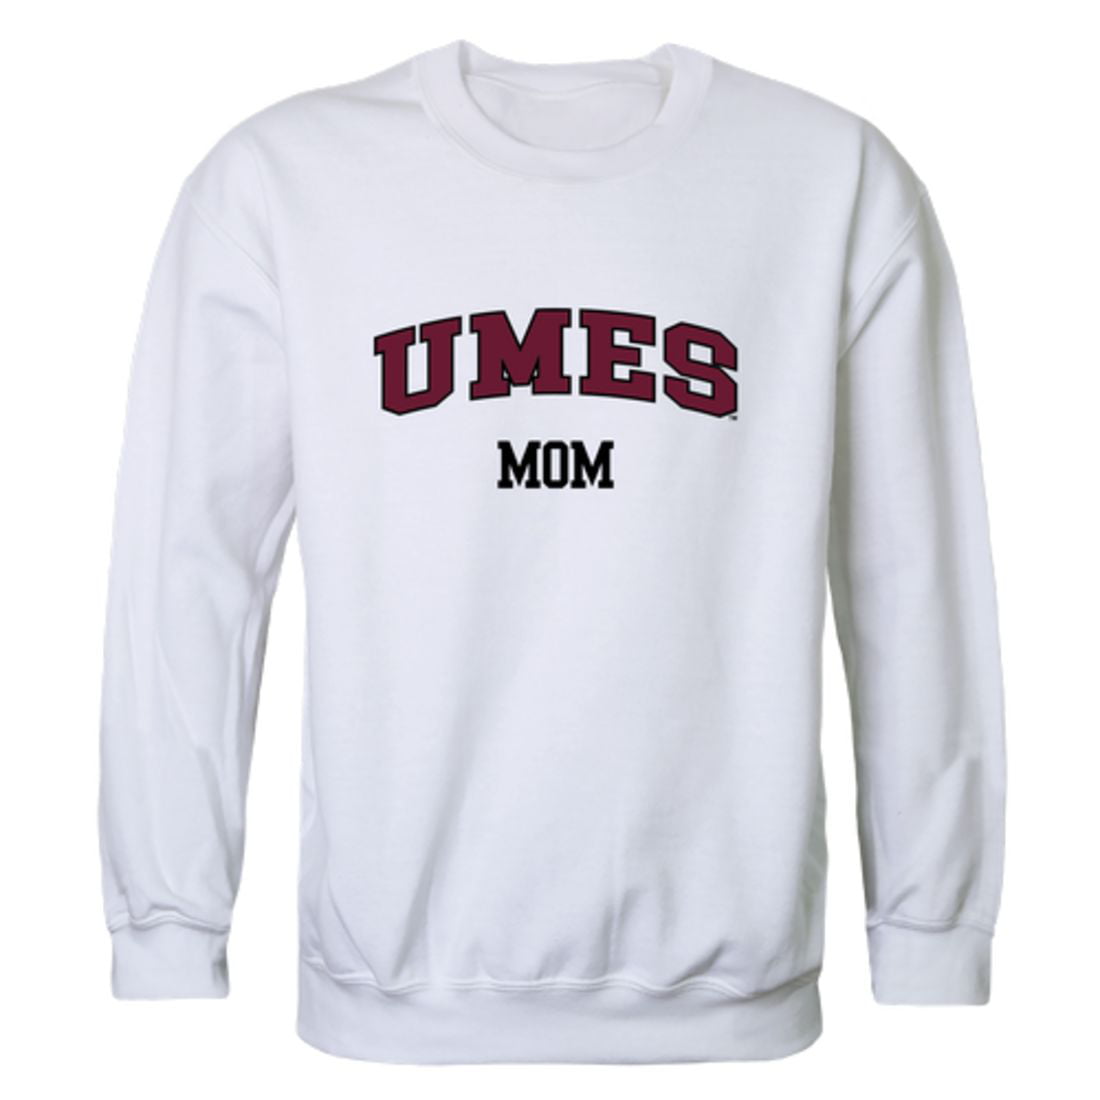 Maryland Hawks UMES Maroon Light Cotton/Spandex Cardigan with White Accent 